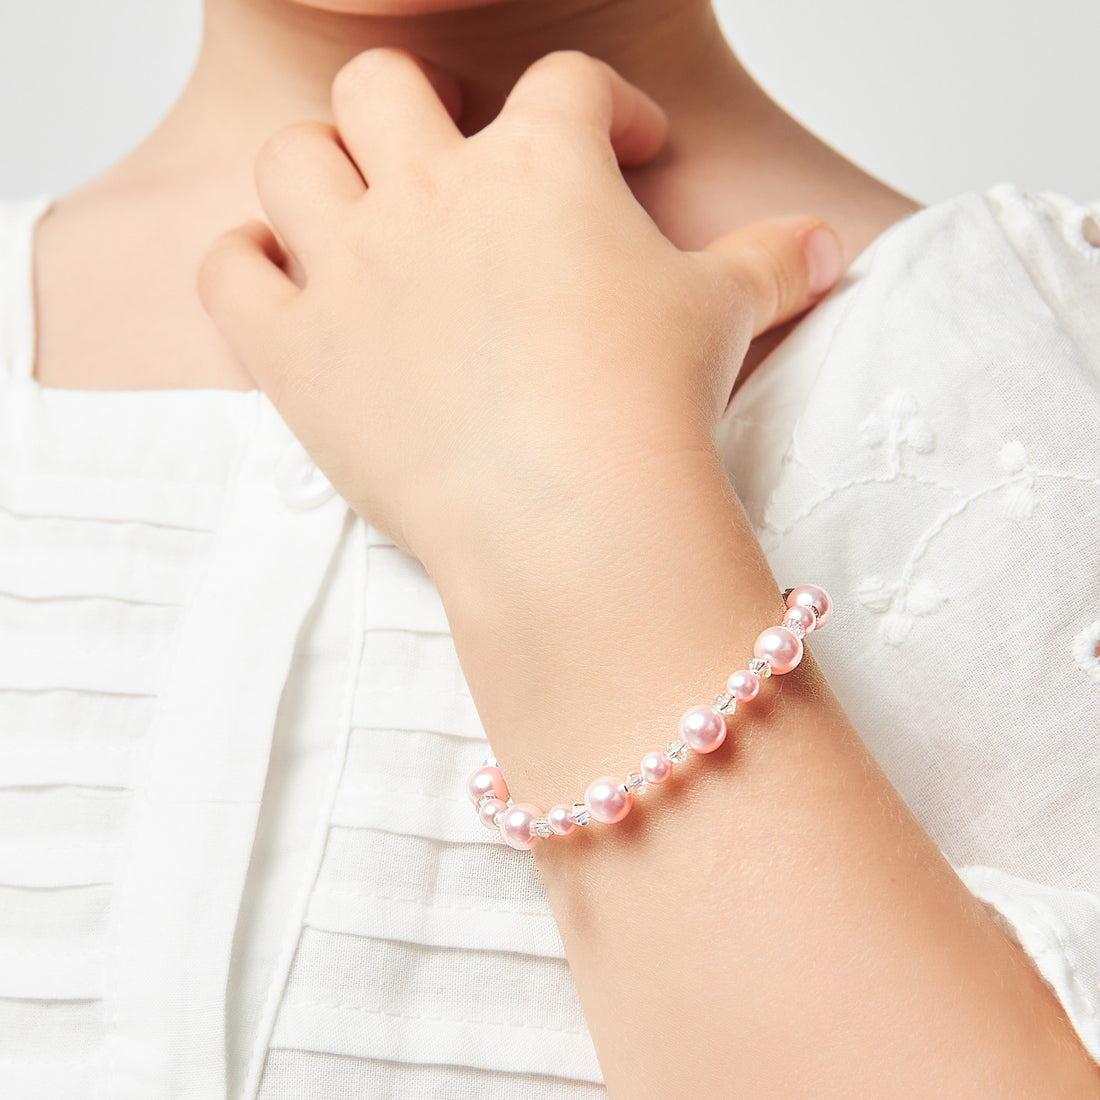 Little Girl Toddler Bracelet with Pink Pearls & Clear Crystals